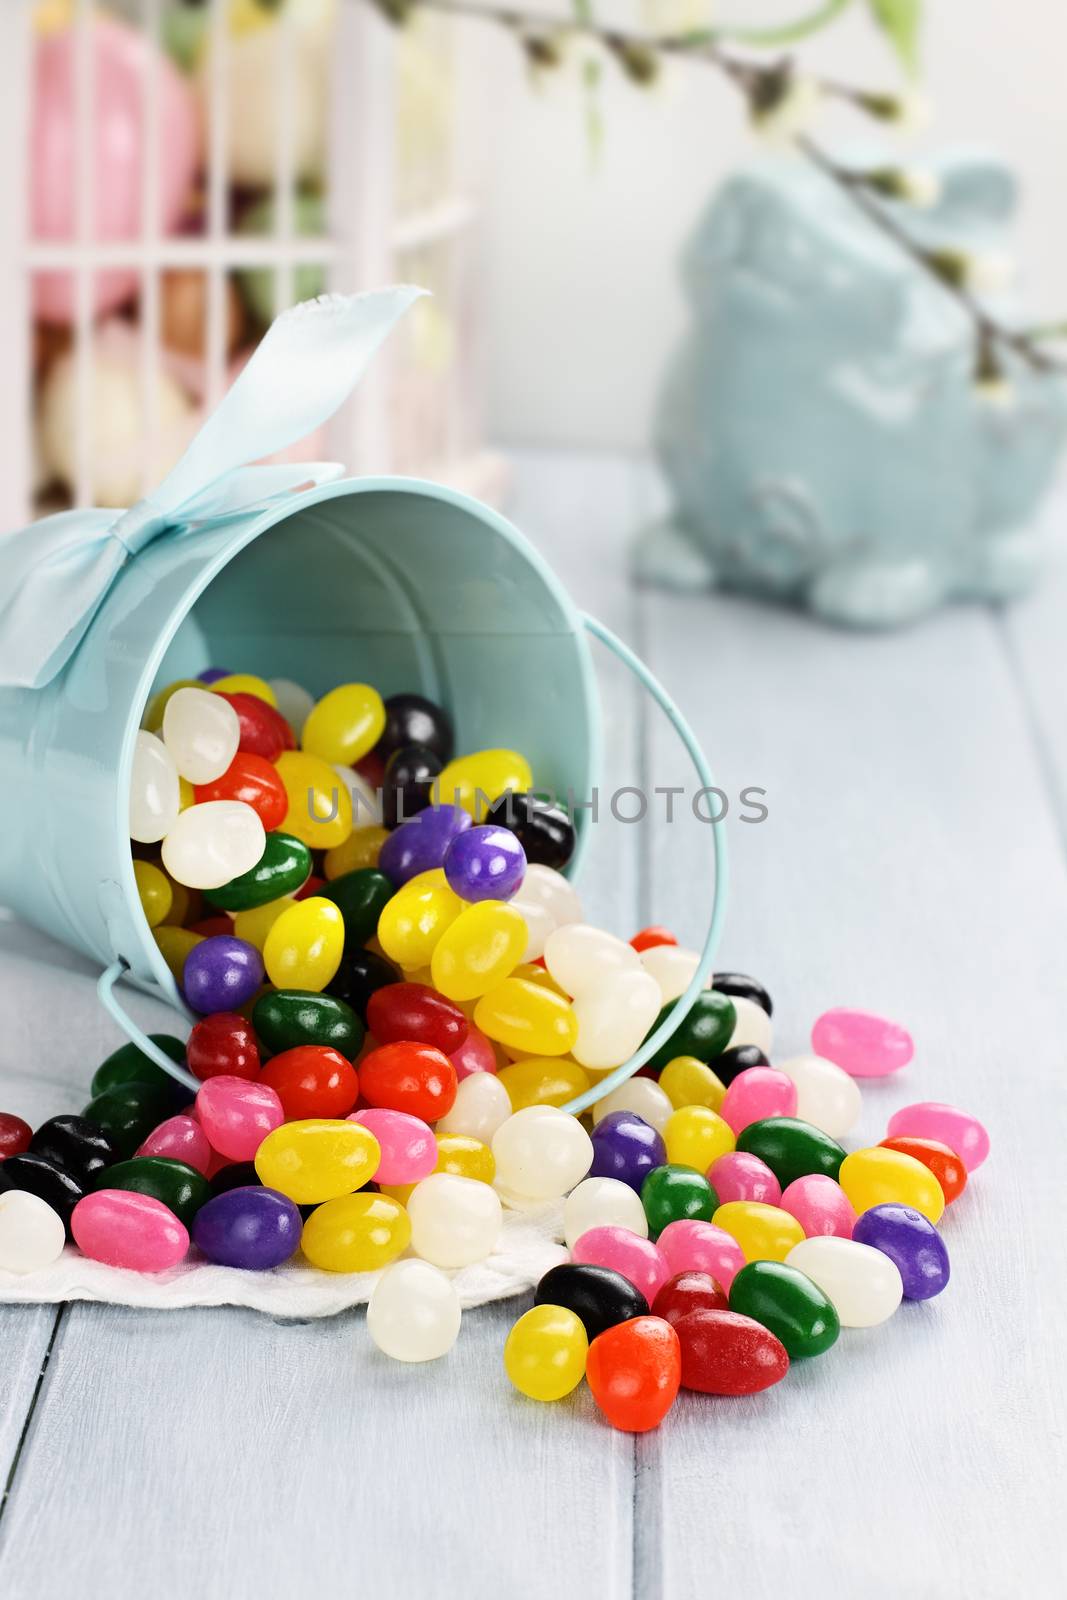 Colorful Jelly Beans by StephanieFrey